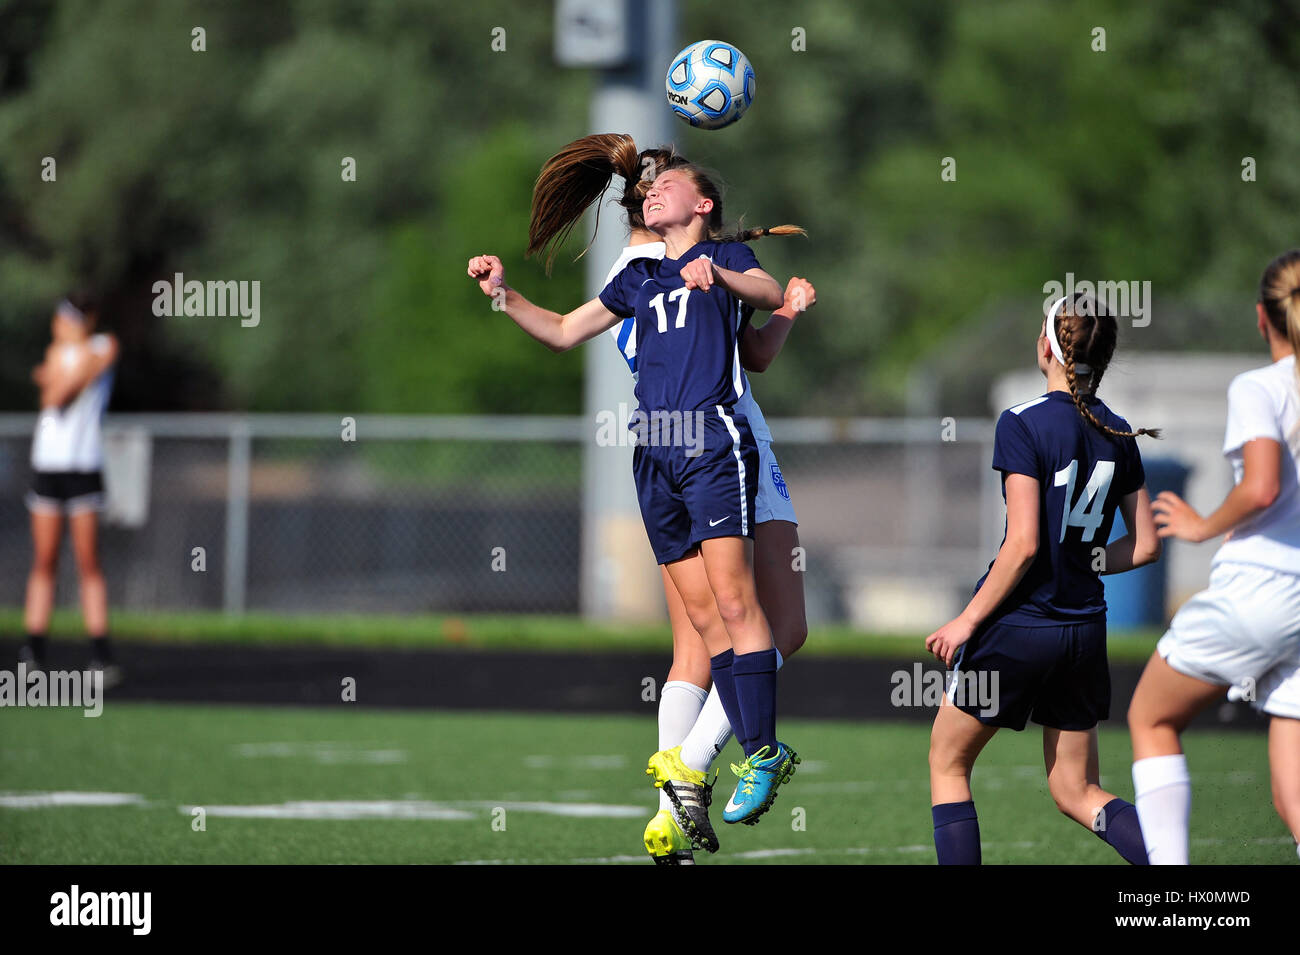 High school player attempting header during competitive match. Stock Photo